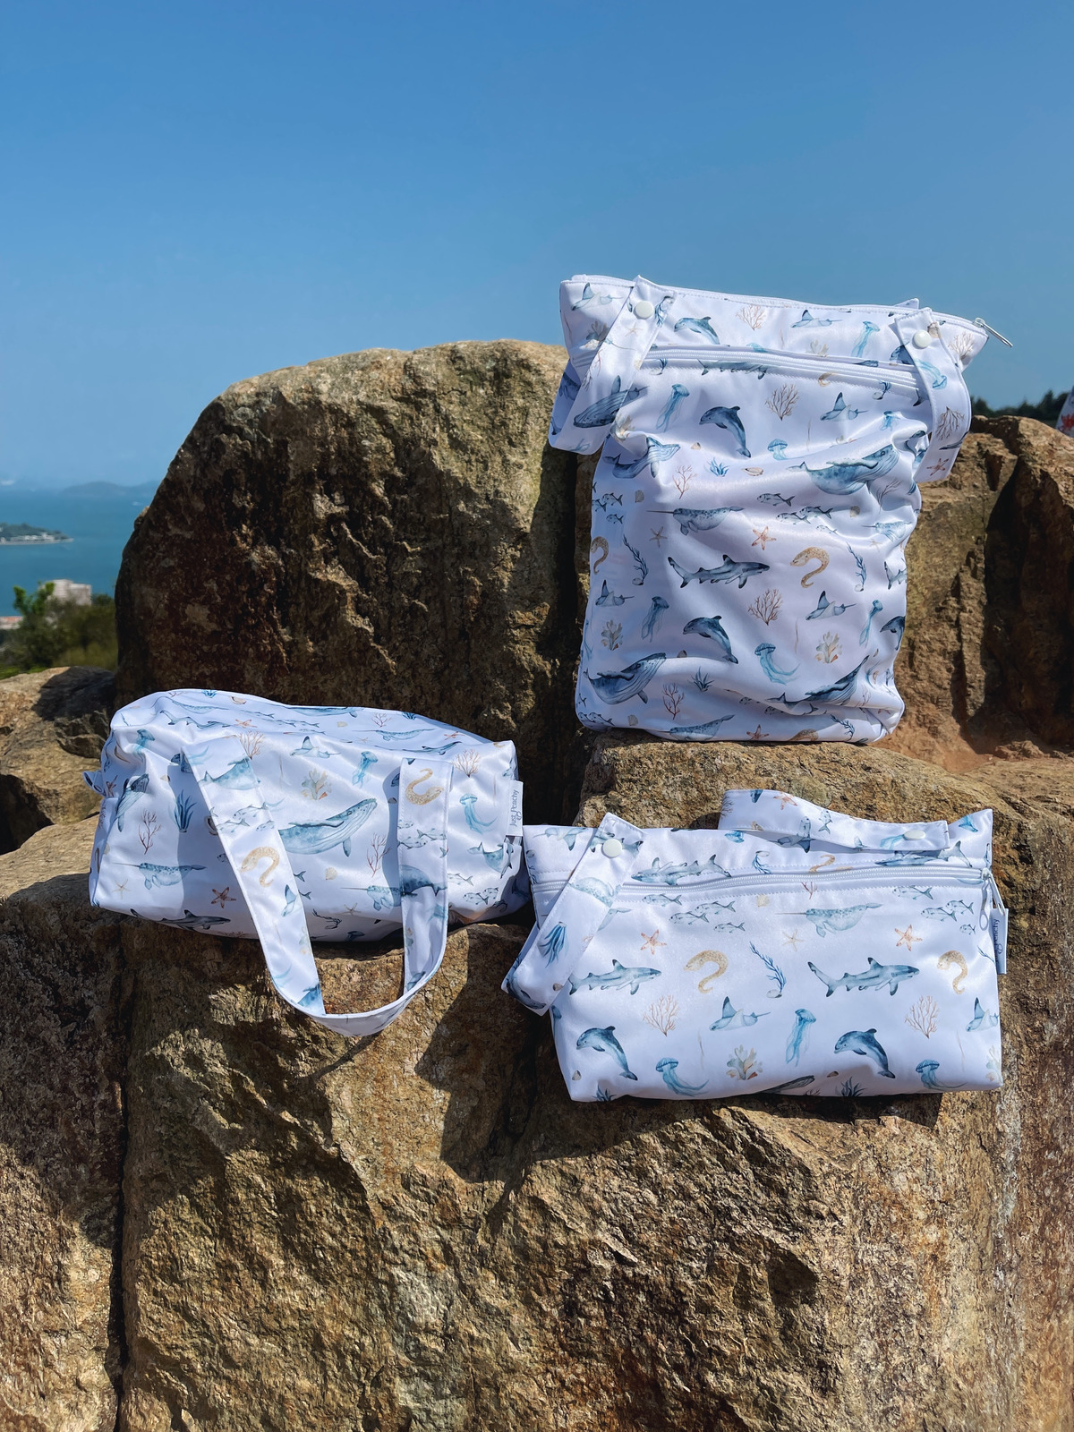 Buy our best-selling reusable wet bag collection as a bundle and save! This reusable wet bag bundle has you covered for organization and storage at home, to convenient packing for everything your little ones need for a day out. Made from upcycled materials. Shop sustainble brands